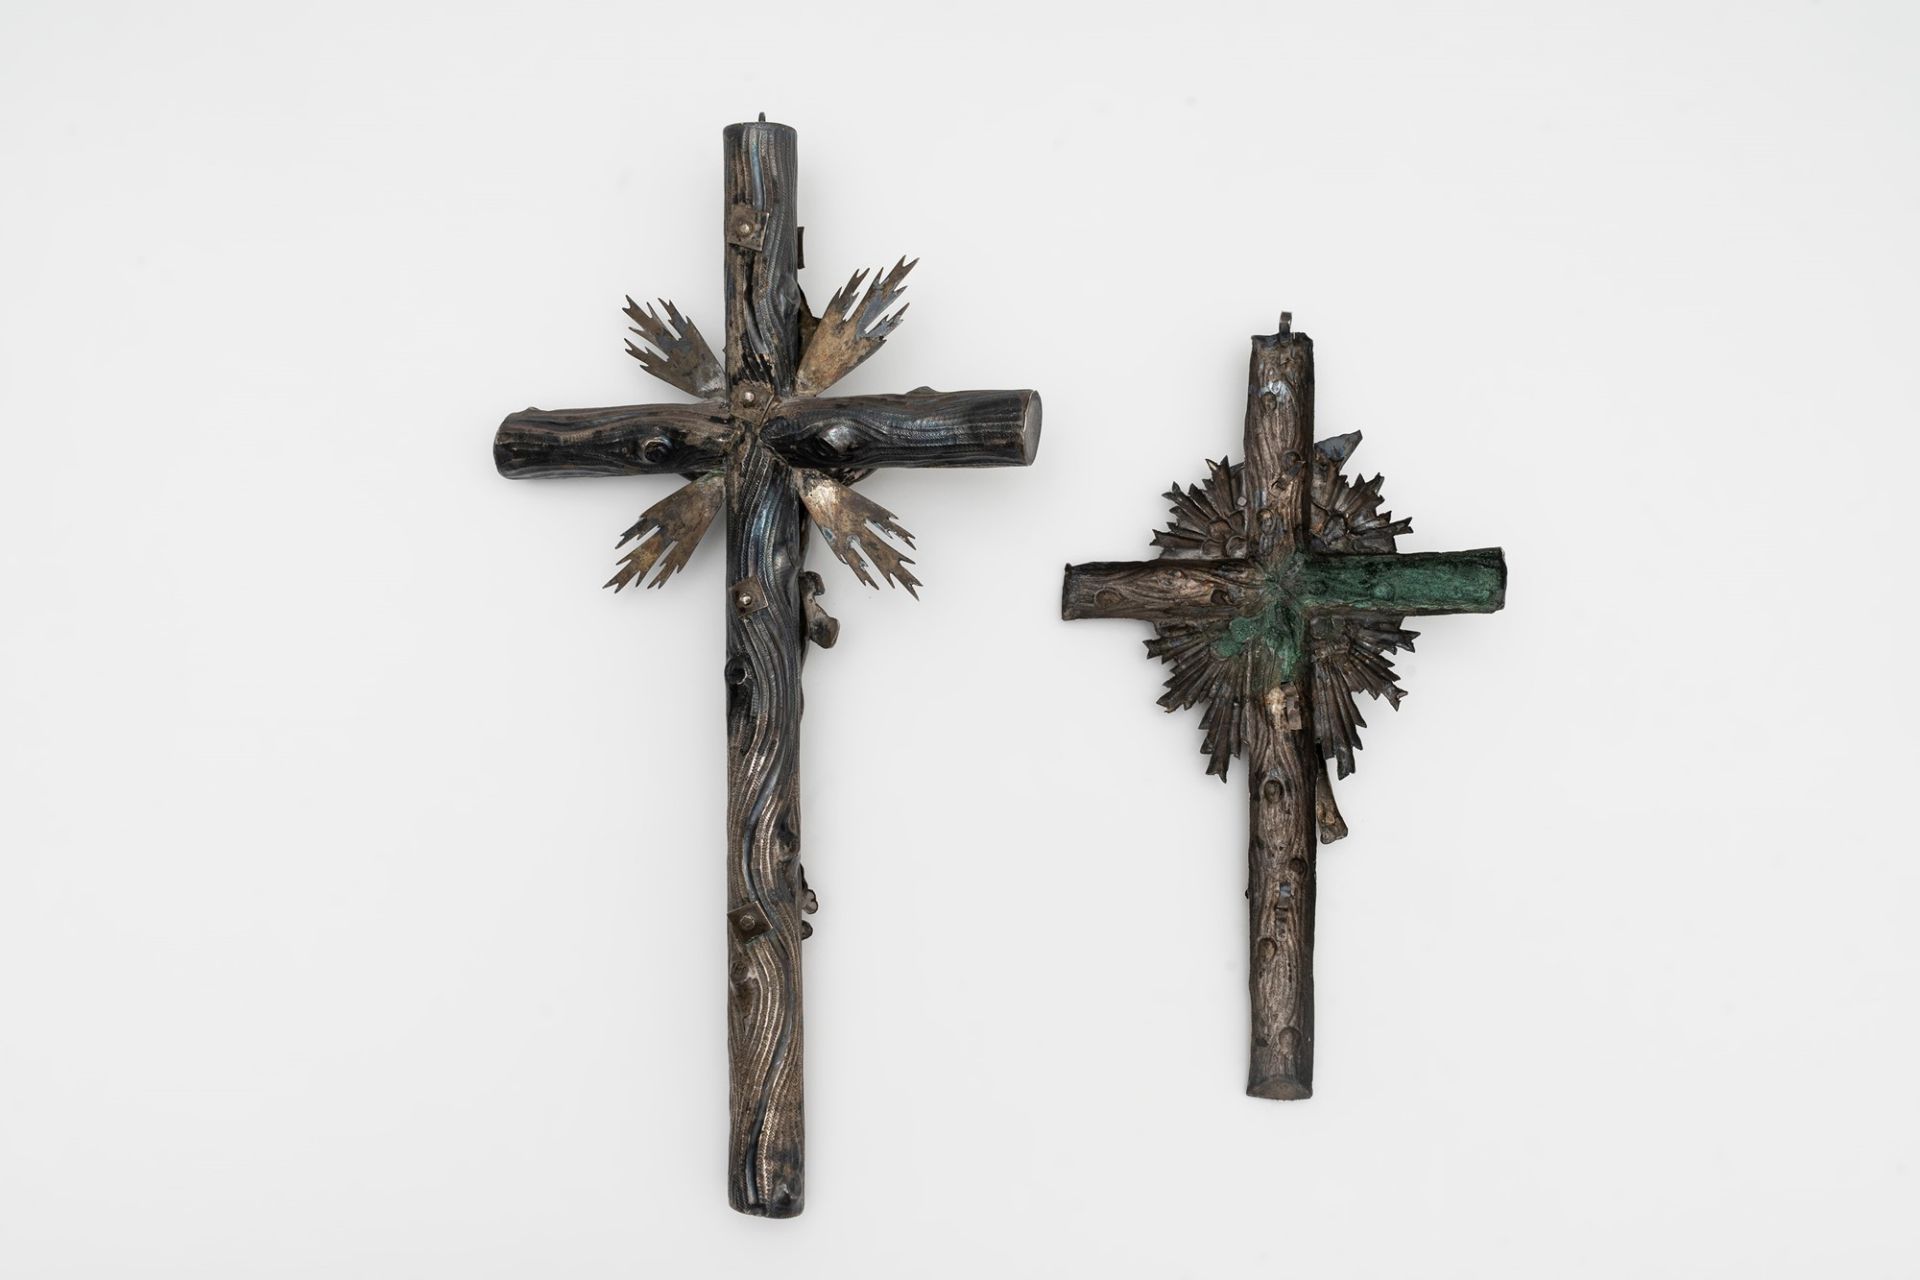 Lot consisting of two silver crucifixes and three miniatures, late 19th century - early 20th century - Image 3 of 3